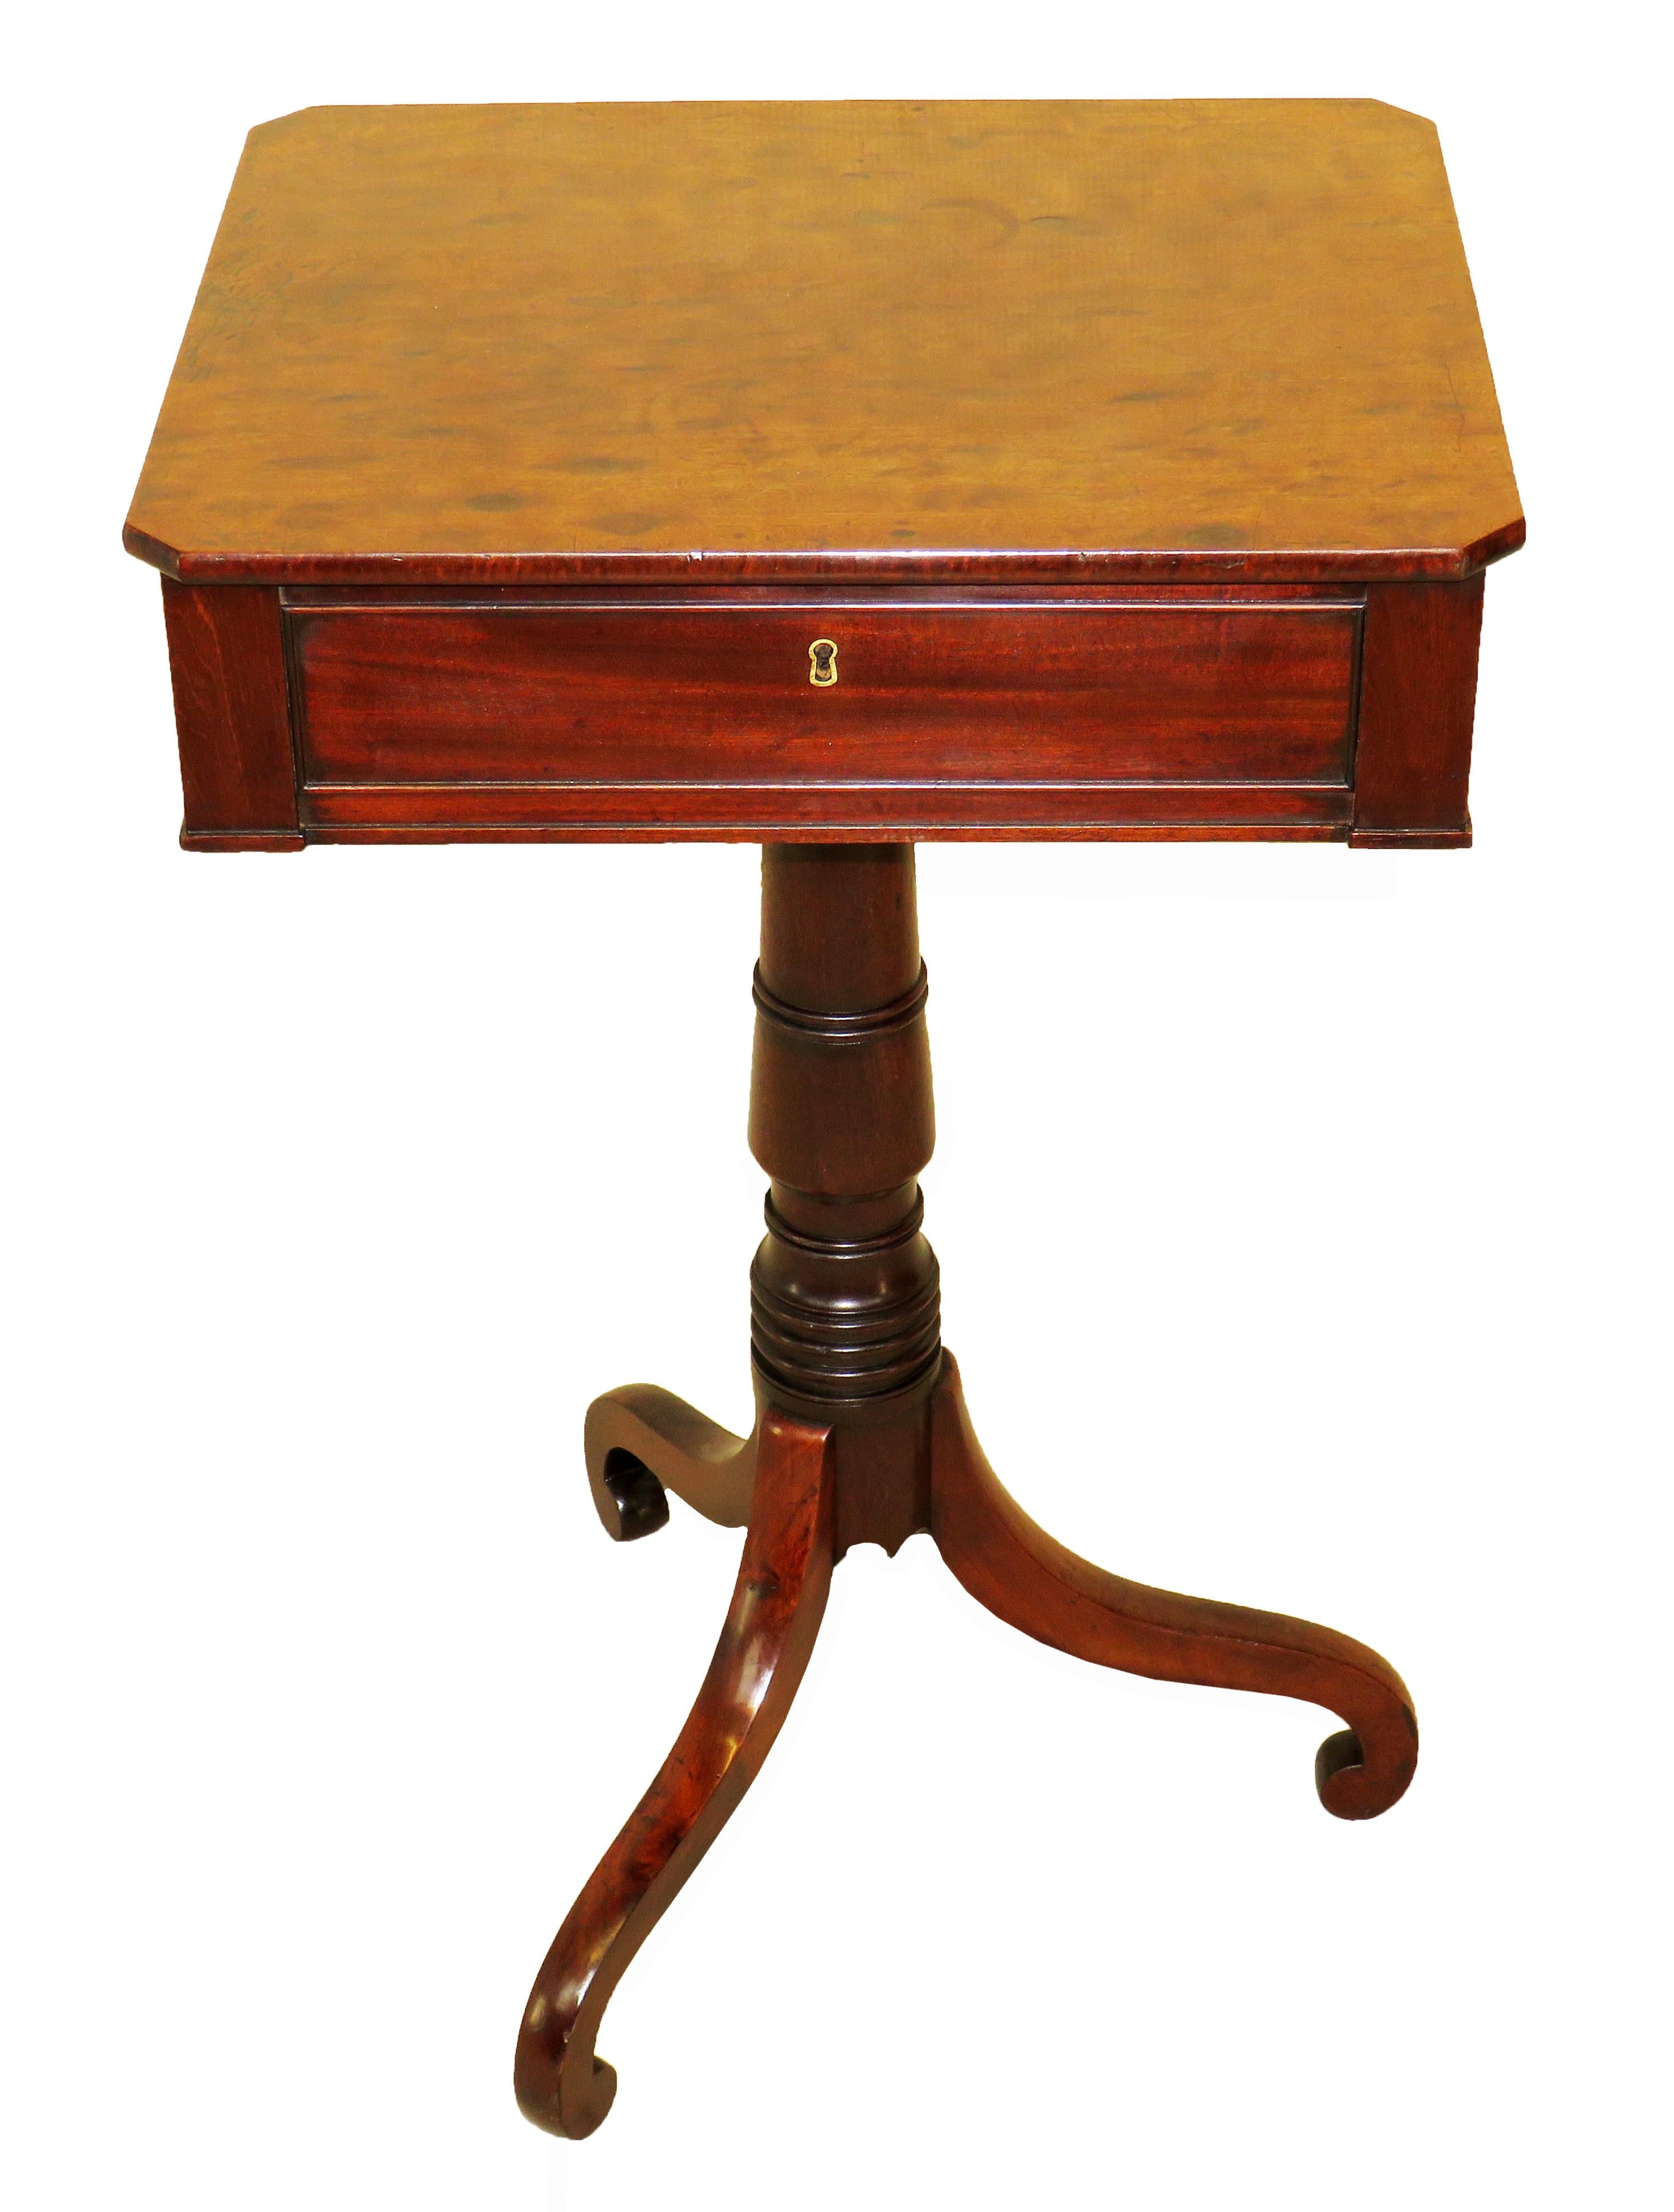 Georgian Mahogany 19th Century Oblong Lamp Table In Good Condition For Sale In Bedfordshire, GB